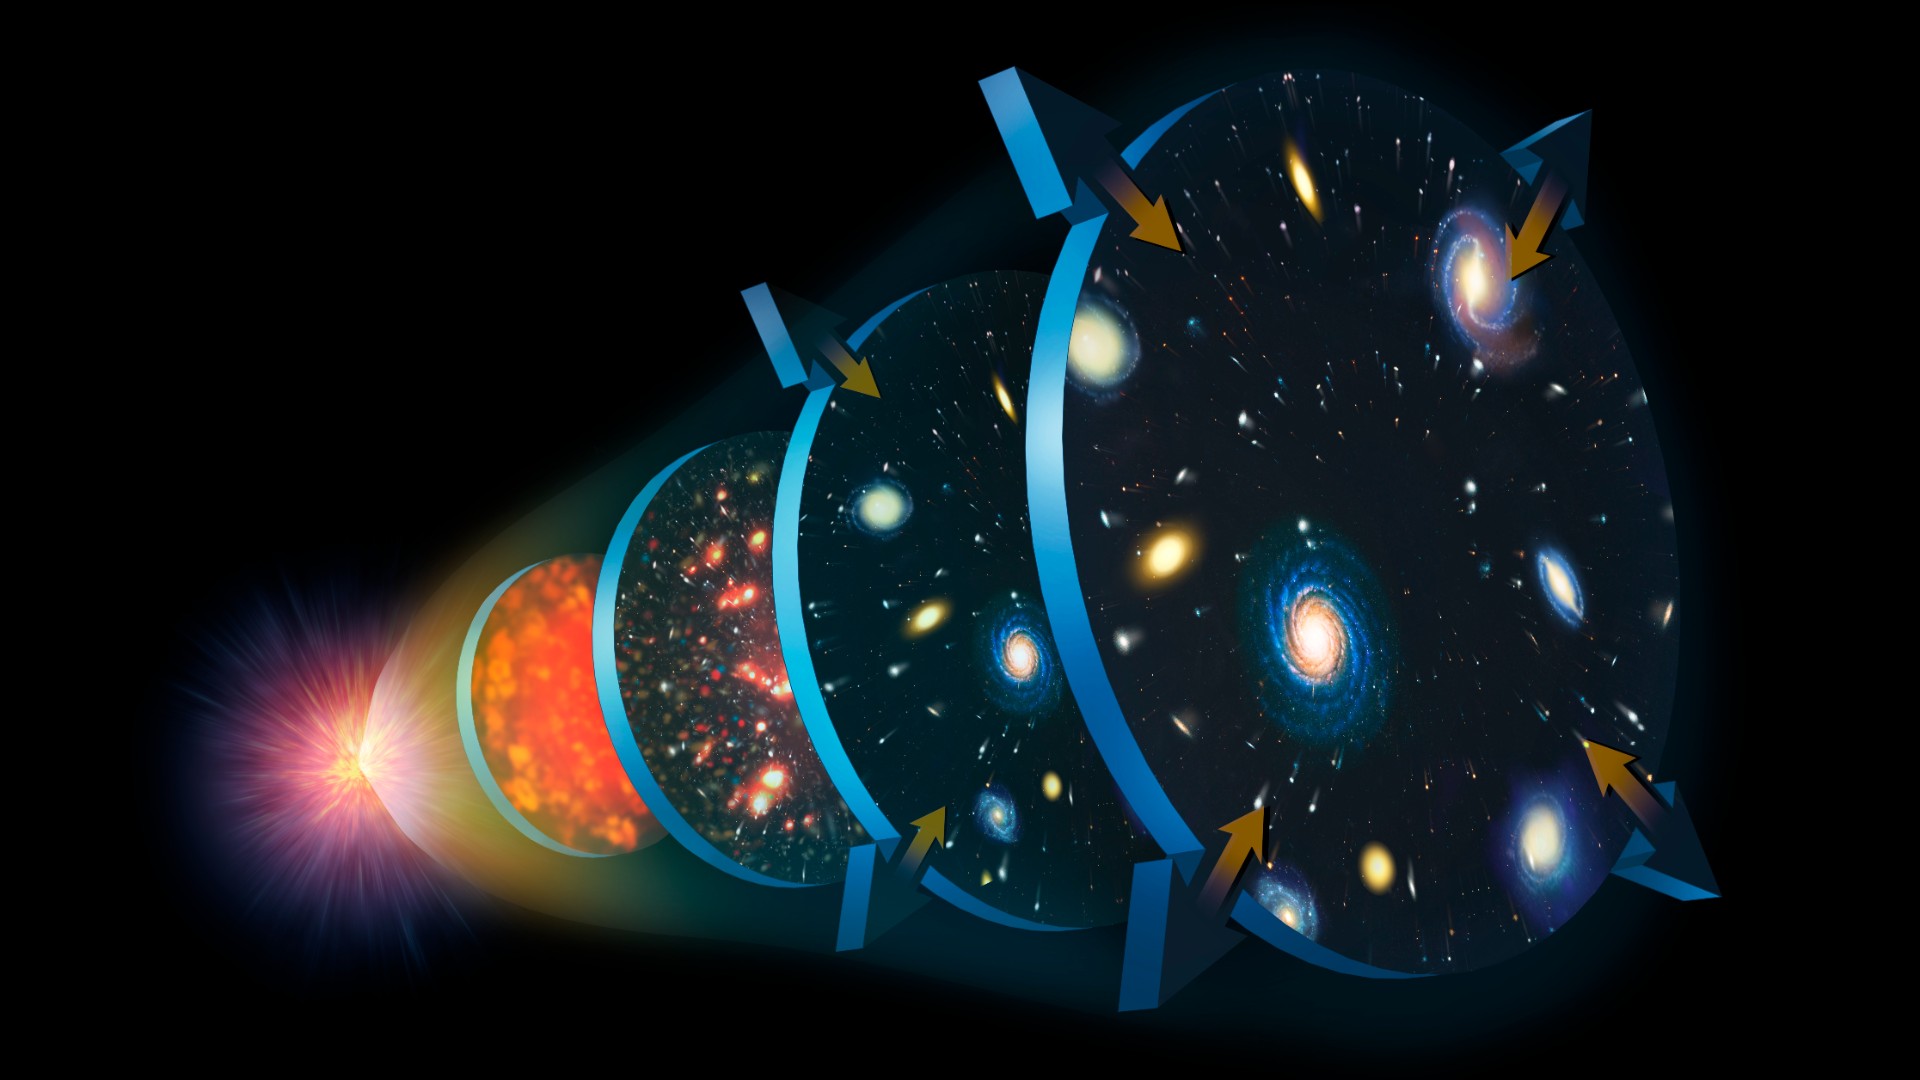 An illustration of the expansion of the Universe. The Big Bang is immediately followed by a rapid expansionary period called inflation. Then, as protons and electrons combine to form atoms, light can travel freely; leaving the cosmic microwave background imprinted upon the sky. The universe's expansion slowed around 10 billion years ago, and it began to fill with galaxies, stars and giant black holes. Around 5 billion years ago, dark energy caused this cosmic expansion to rapidly accelerate. To this day, it shows no signs of stopping.